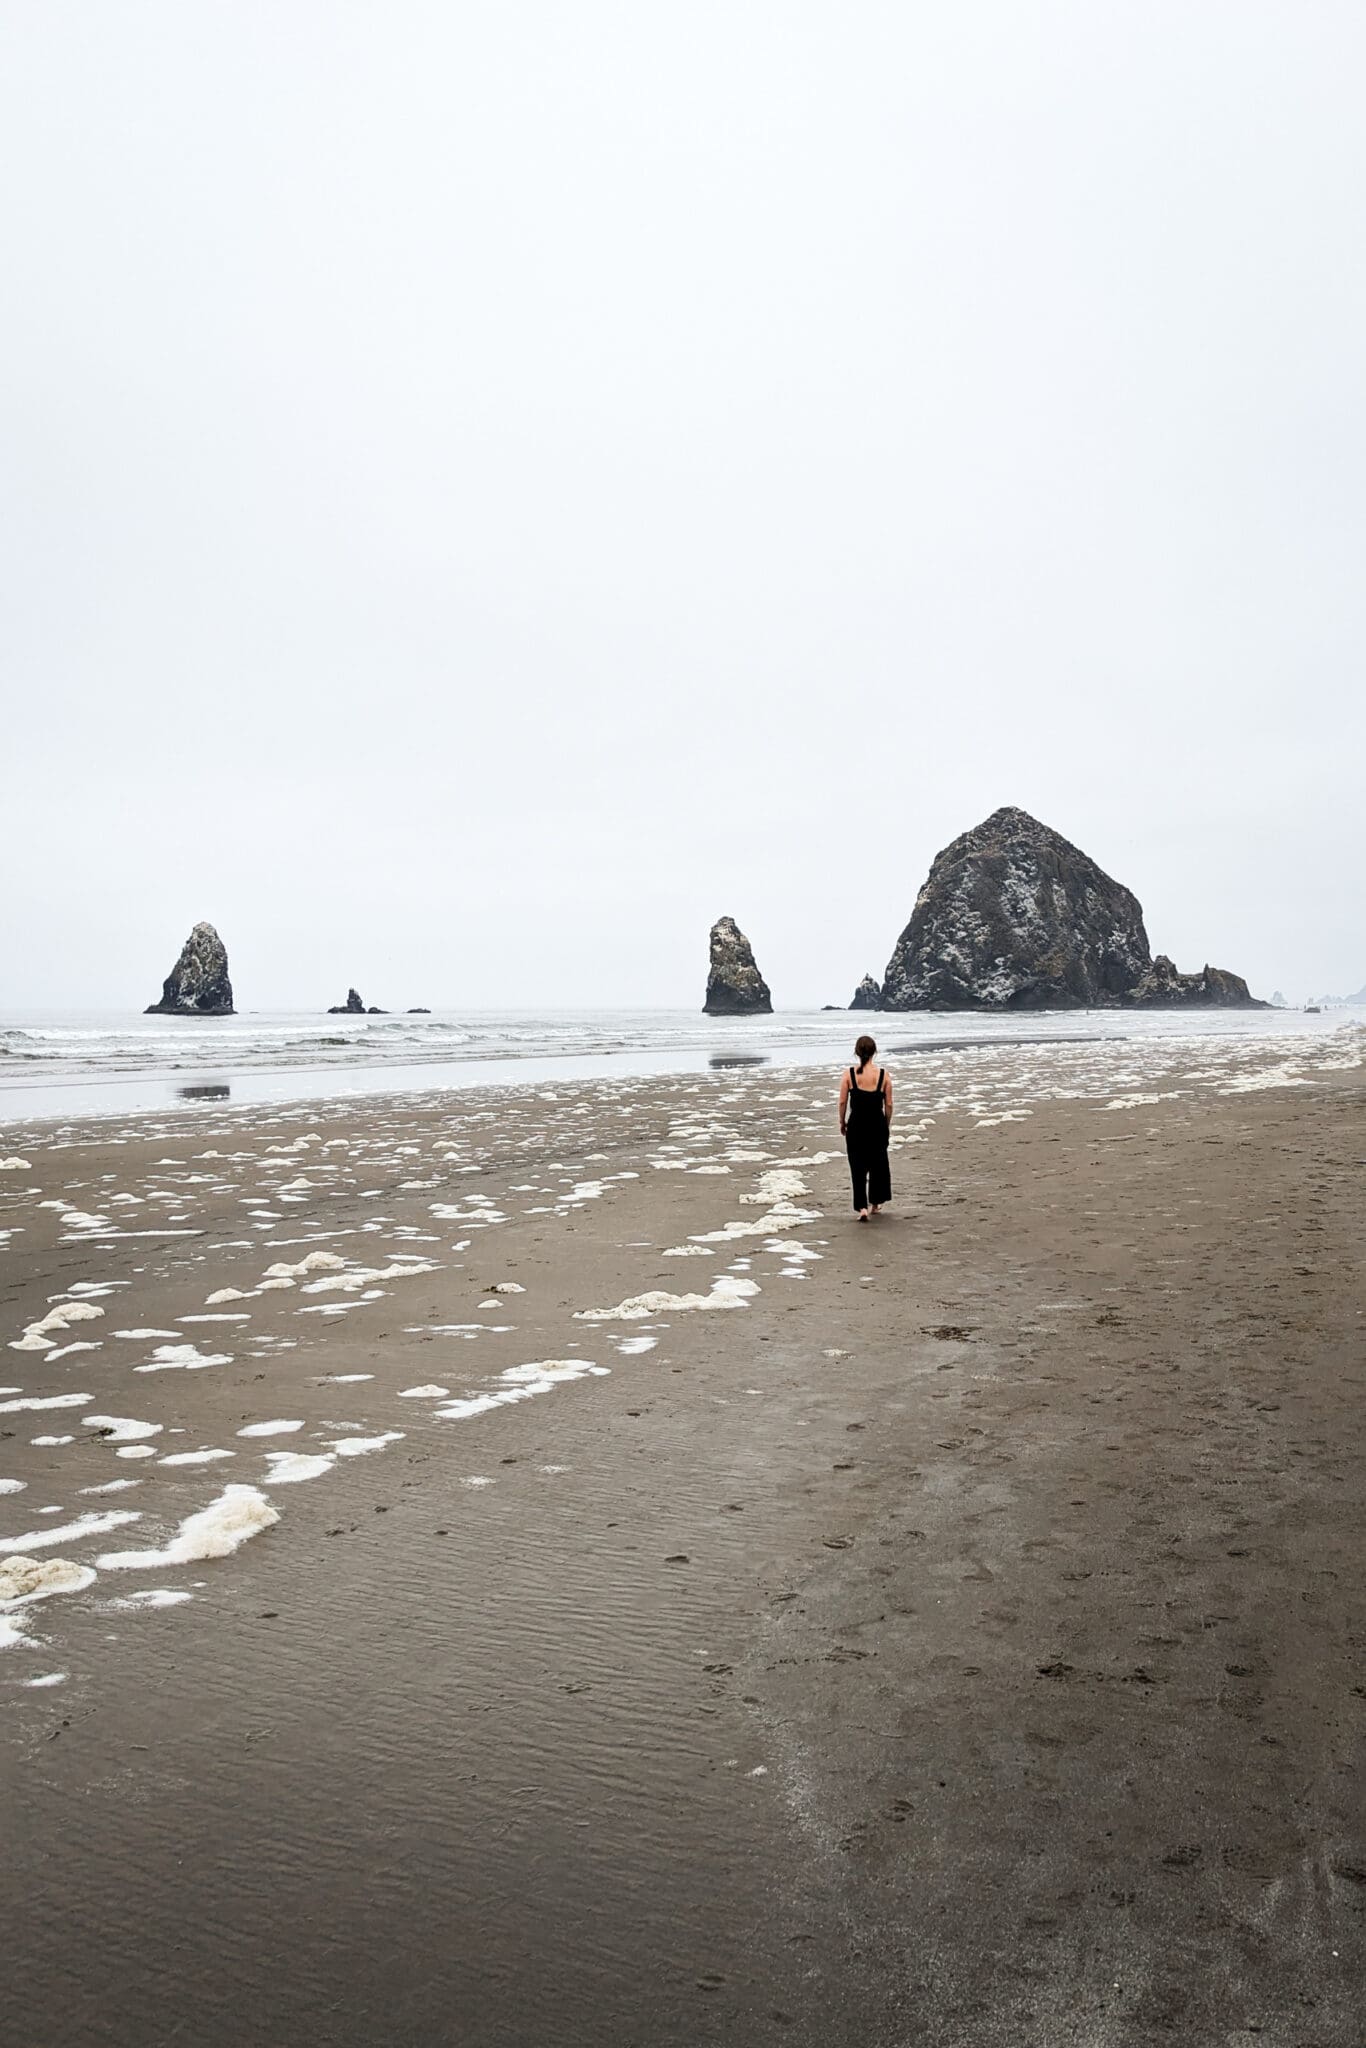 A road trip from Vancouver to Colorado - Woman walking on Cannon Beach, Oregon